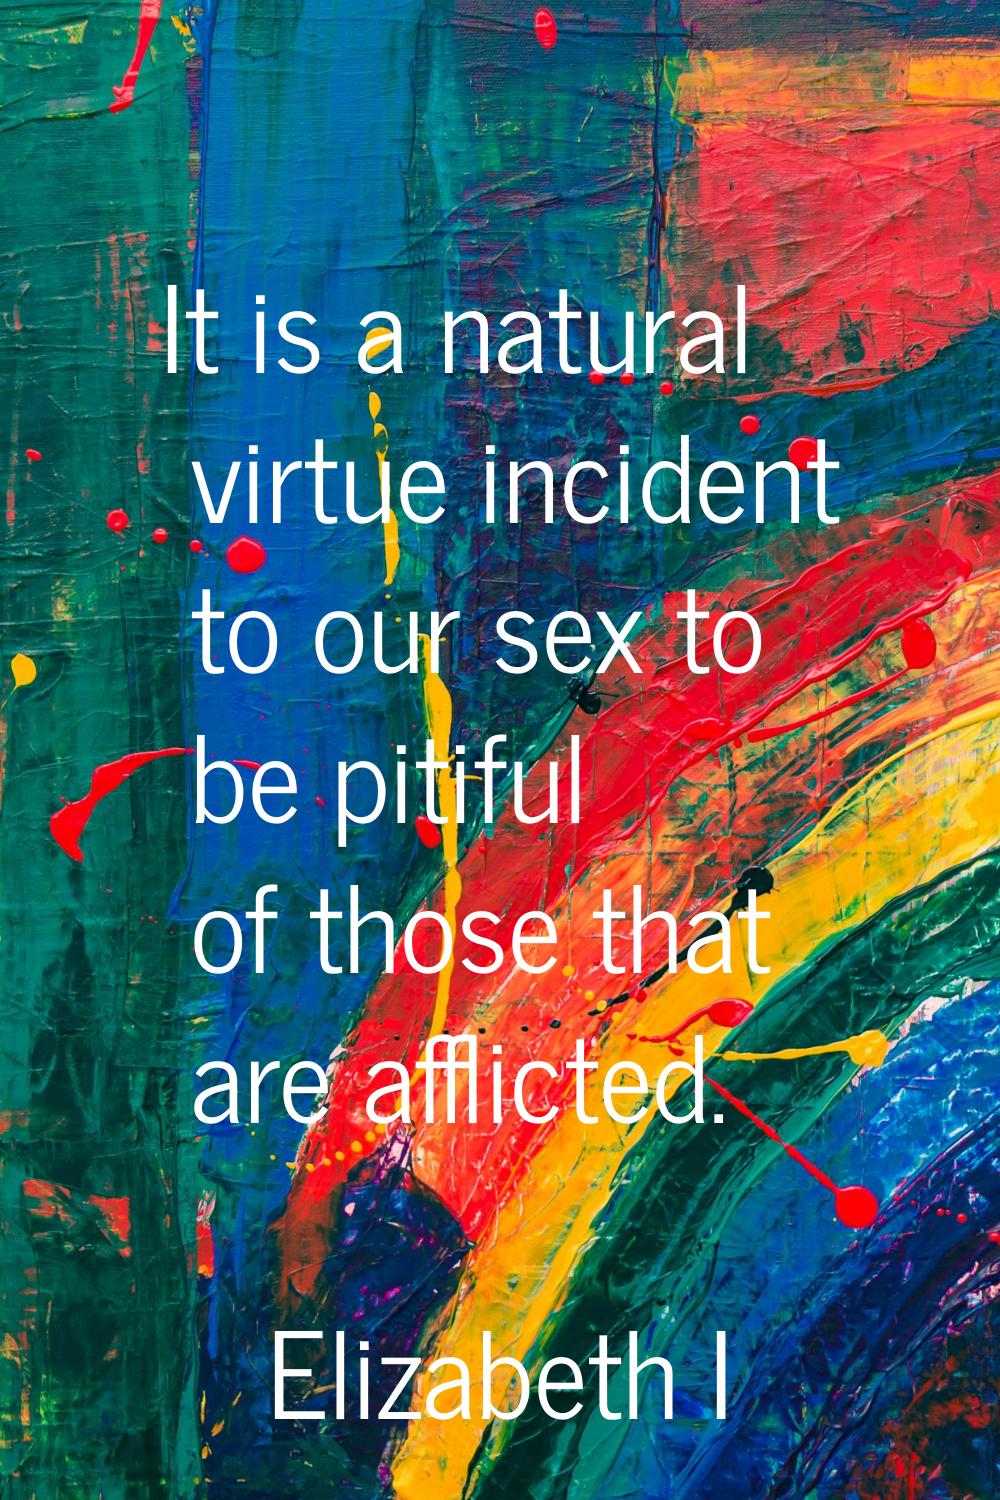 It is a natural virtue incident to our sex to be pitiful of those that are afflicted.